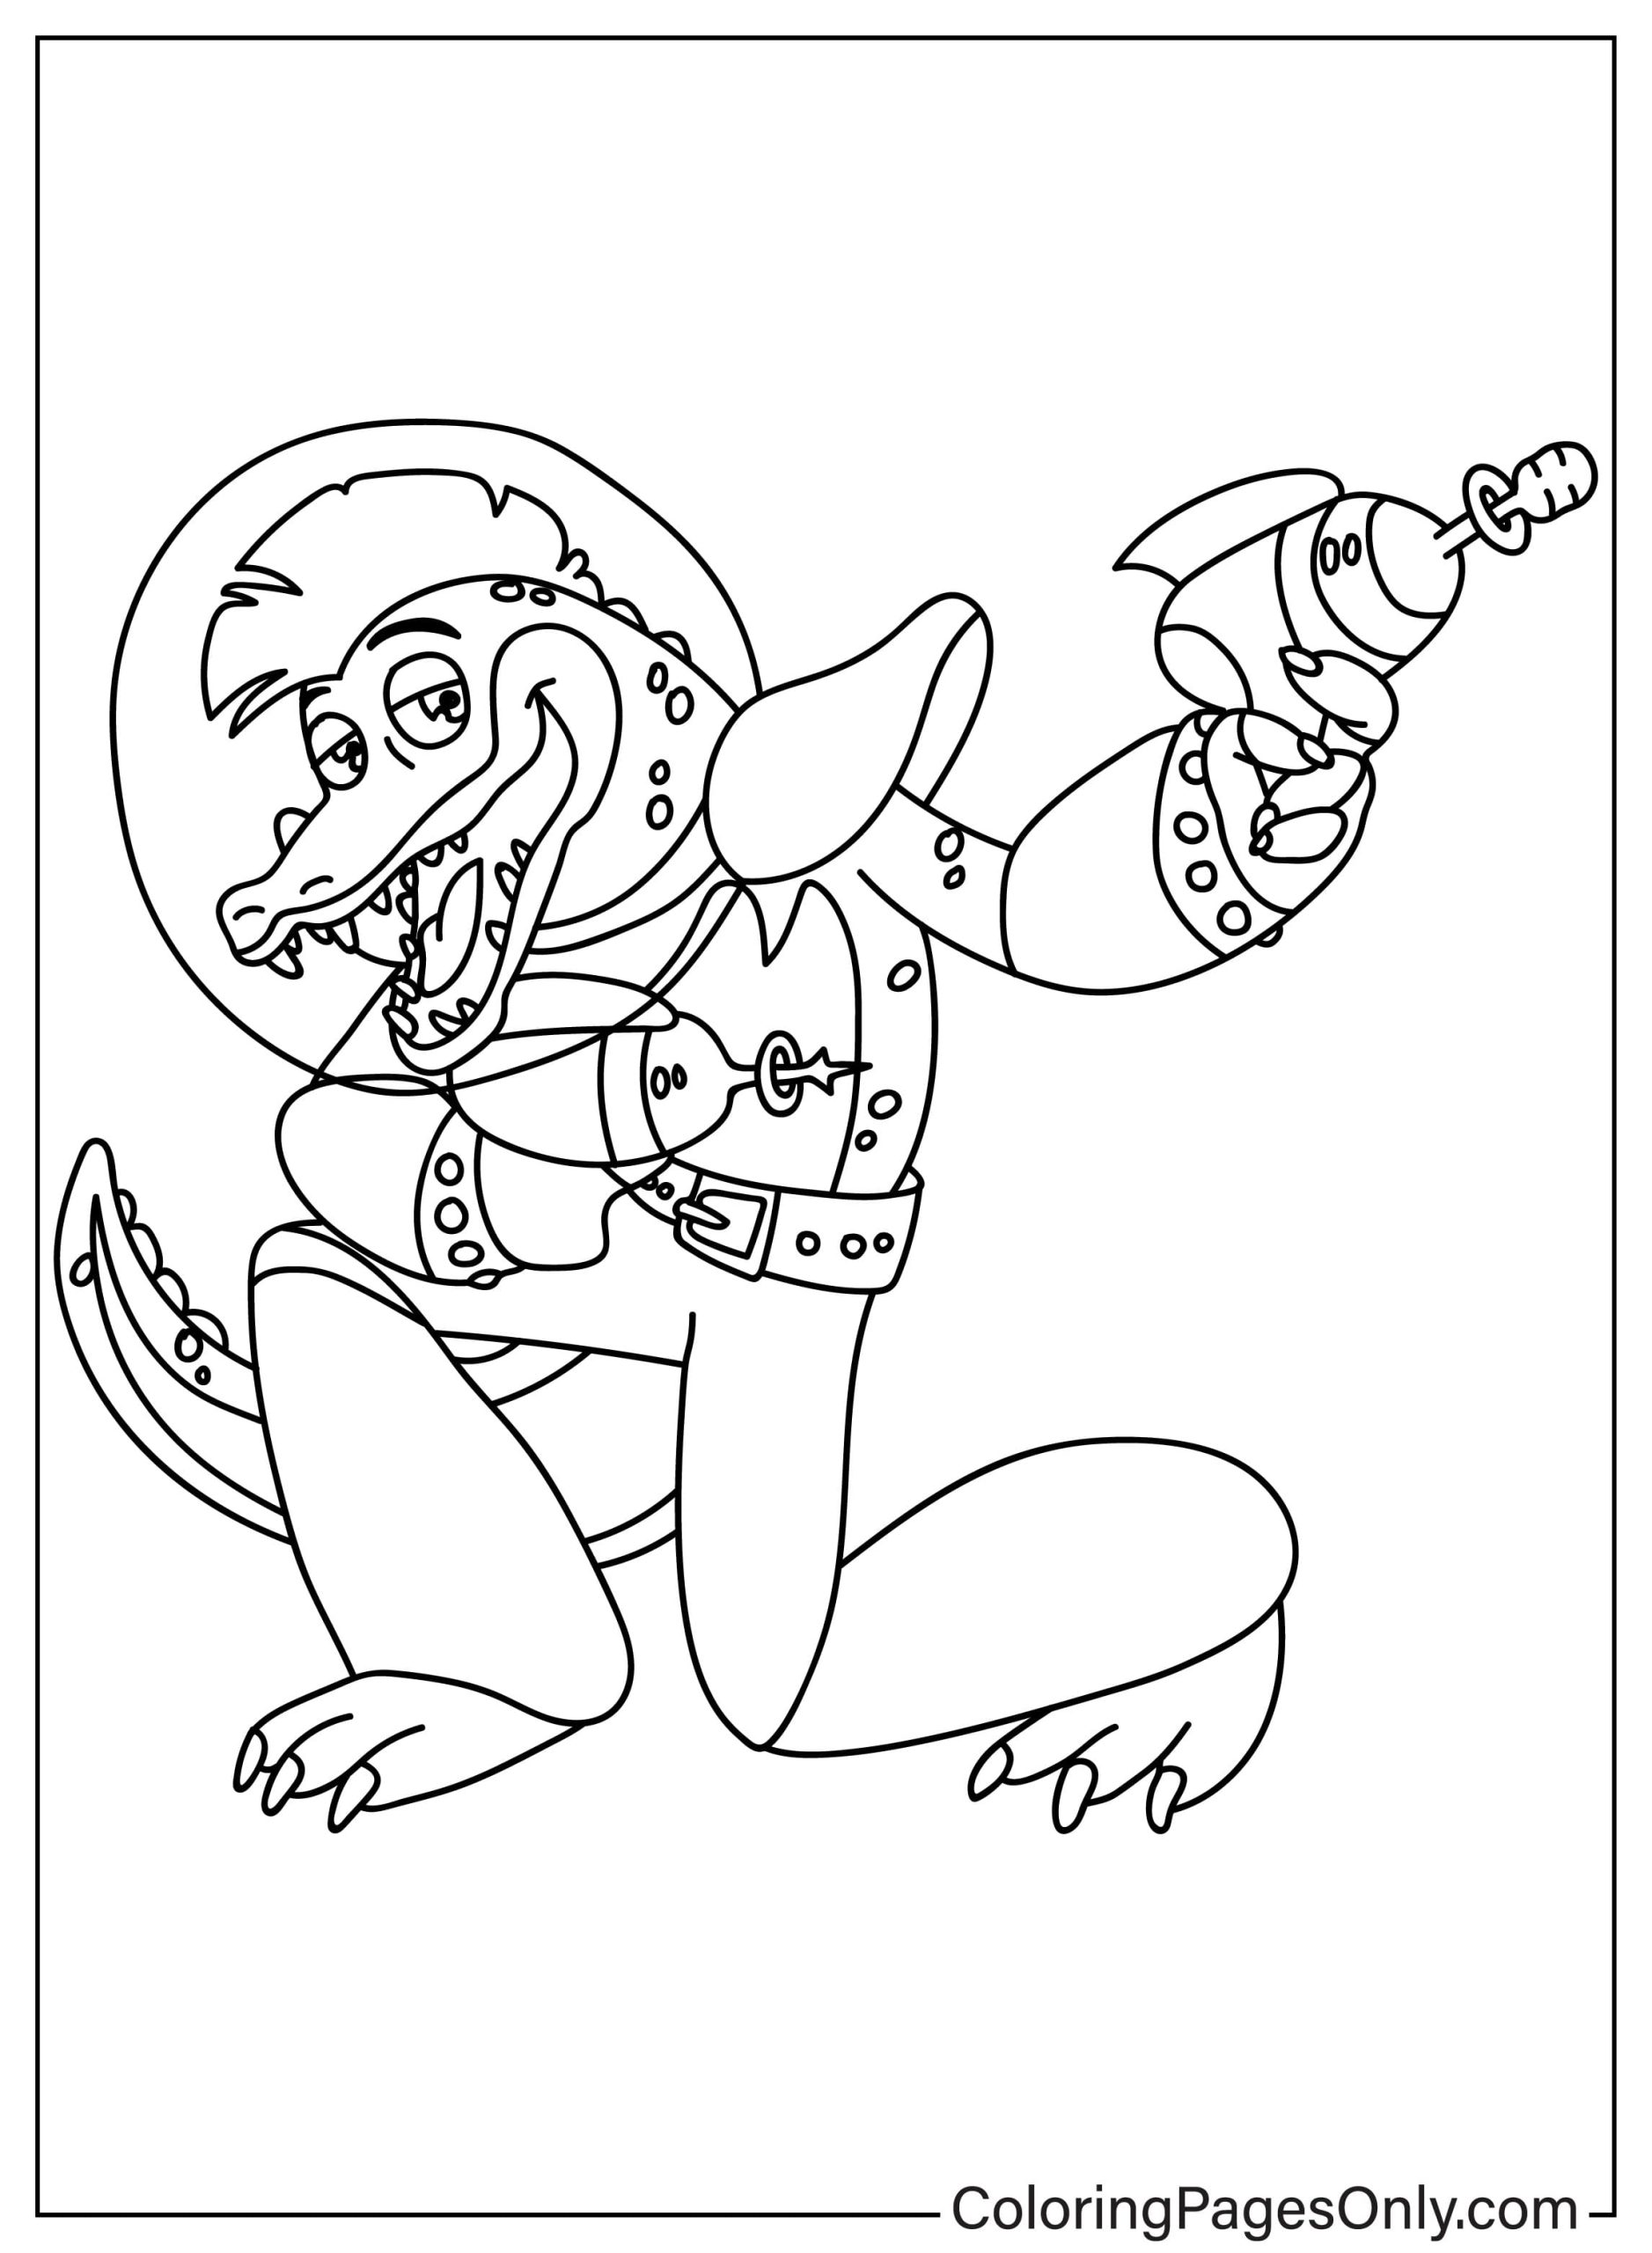 Montgomery Gator Coloring Page Free ...